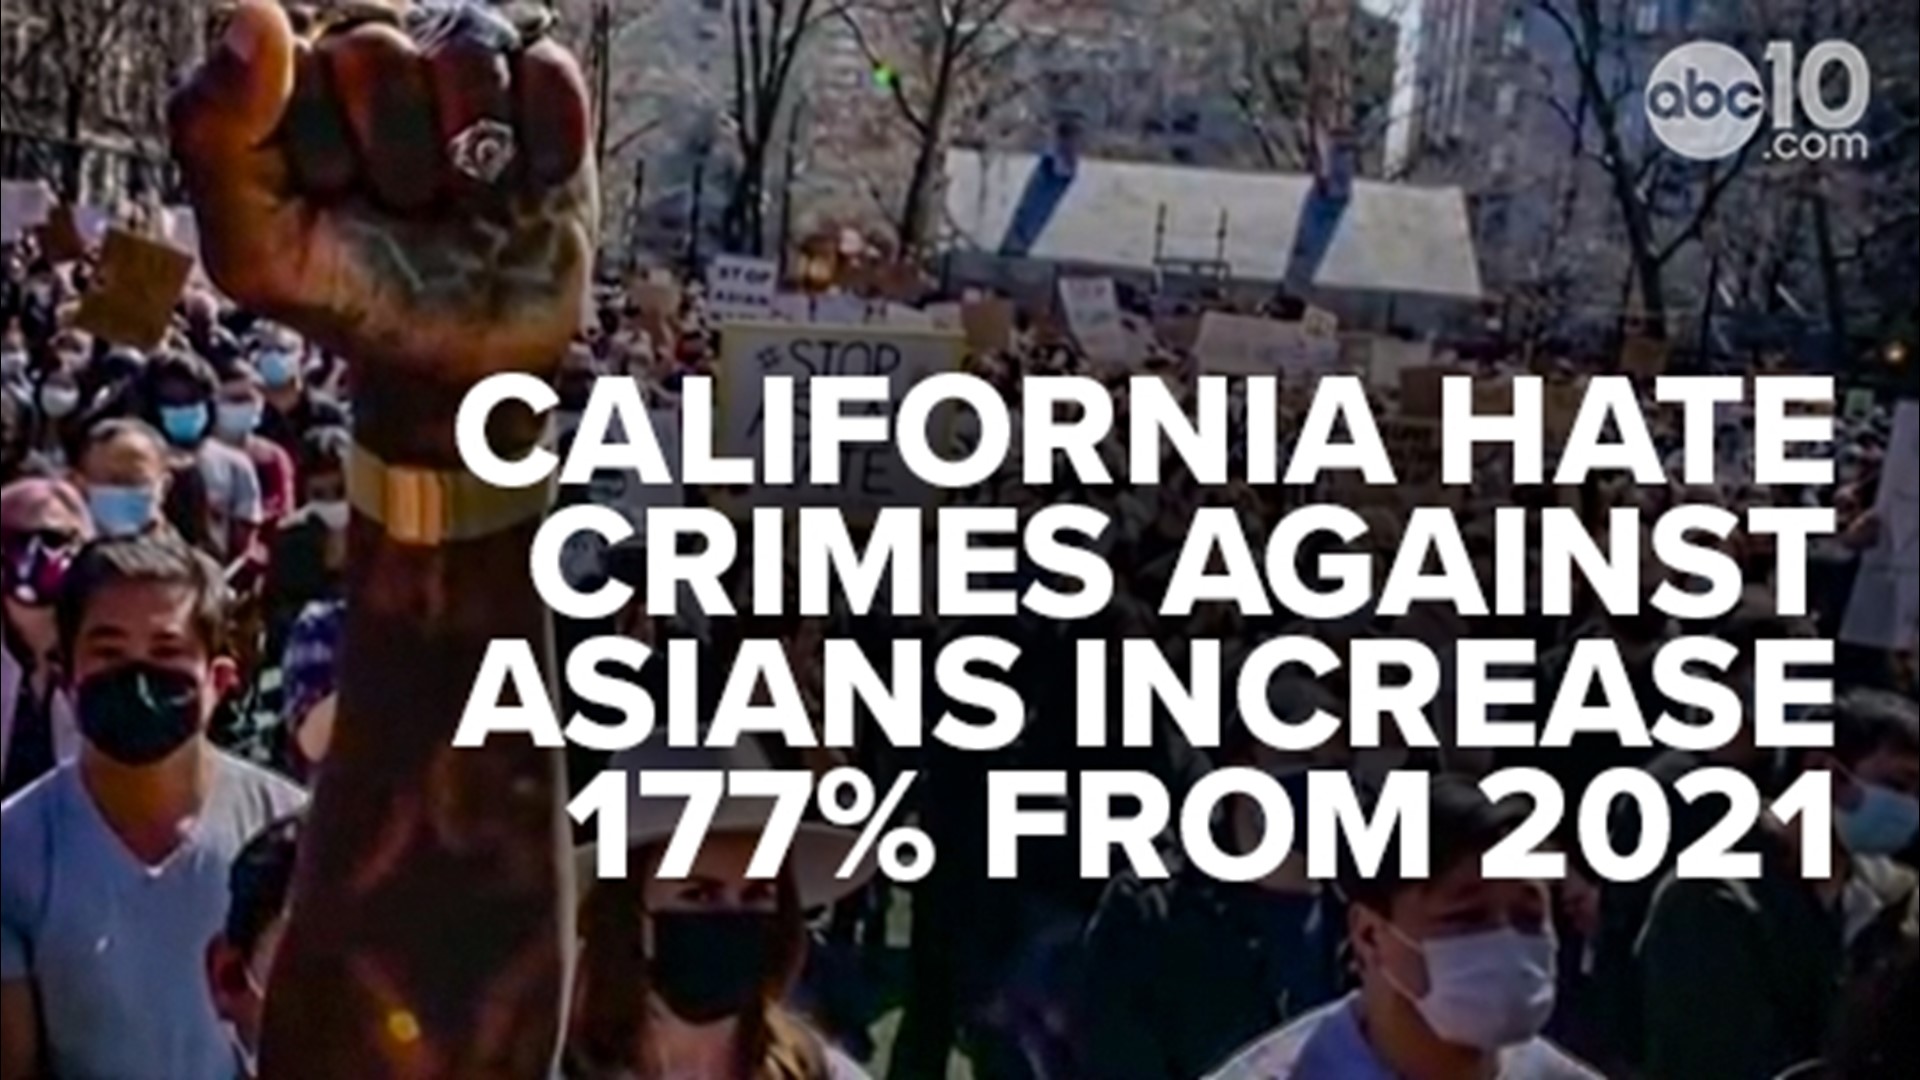 While crimes against Black and Latino Californians rose in double percentage points, hate crimes against Asians jumped a whopping 177% over the past year.